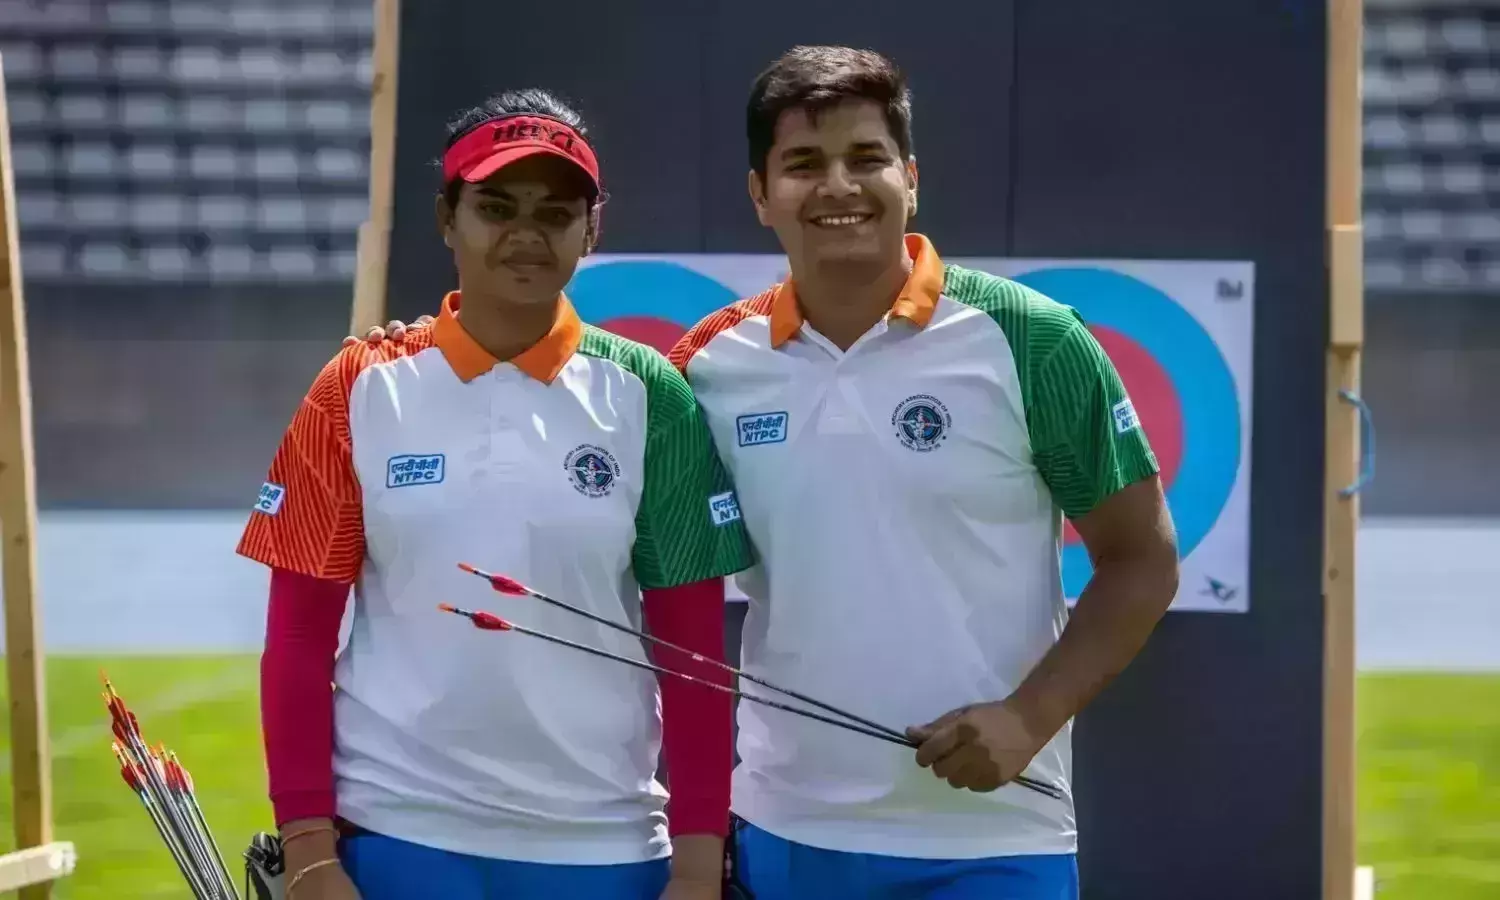 Archery: India wins maiden World Cup gold in compound mixed